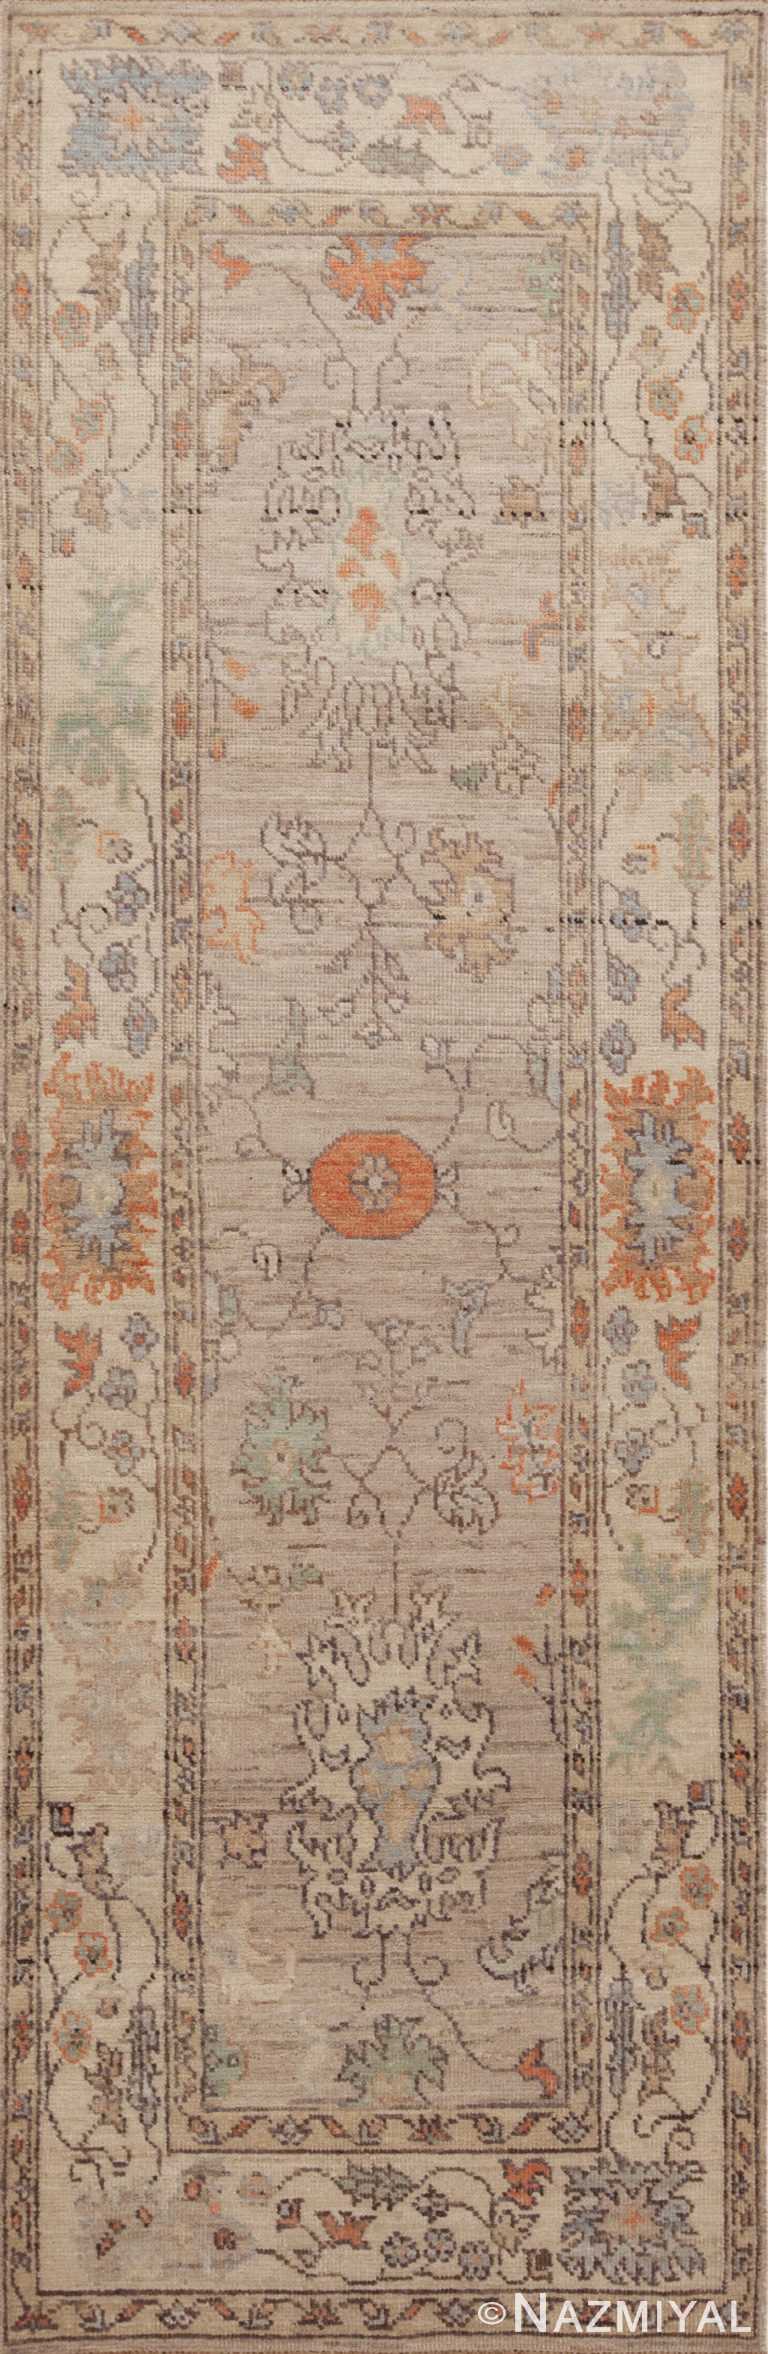 A Stunning Artistic Tribal Rustic Feel Decorative Ivory Cream Color Modern Turkish Oushak Design Runner Rug 11201 by Nazmiyal Antique Rugs